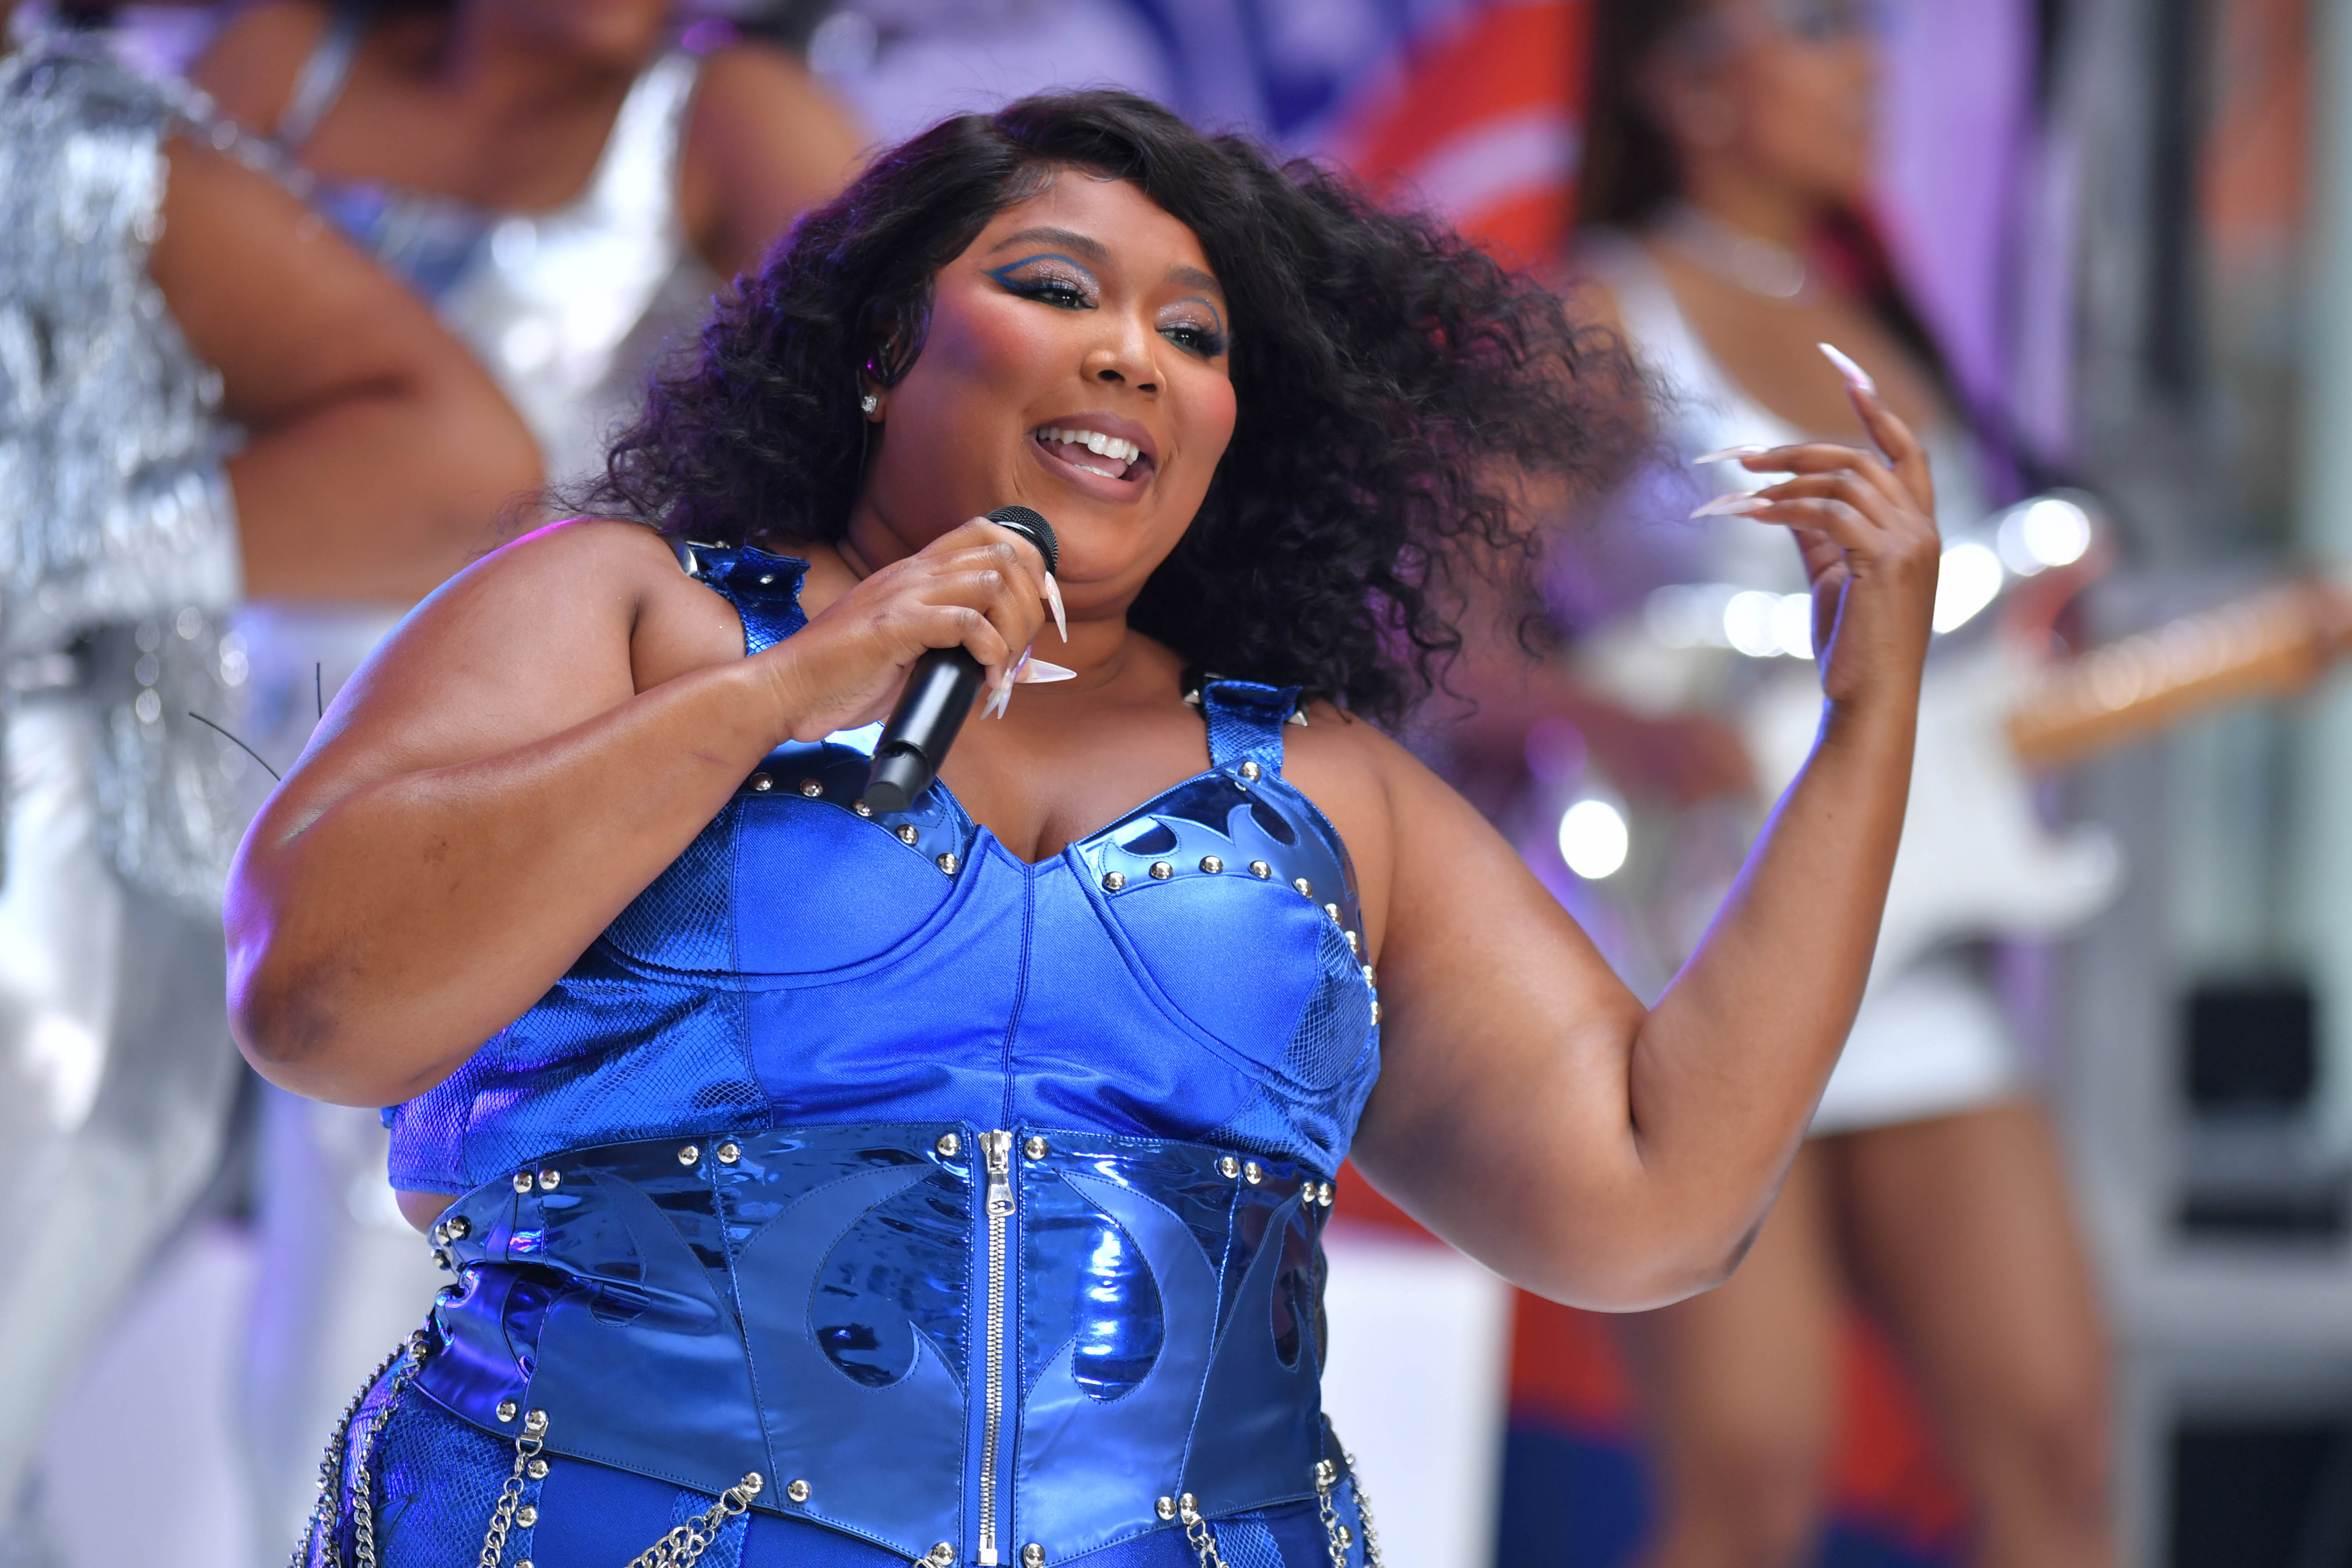 Moms Need More Body-Positive Heroes Like Lizzo — For Their Kids and For Themselves